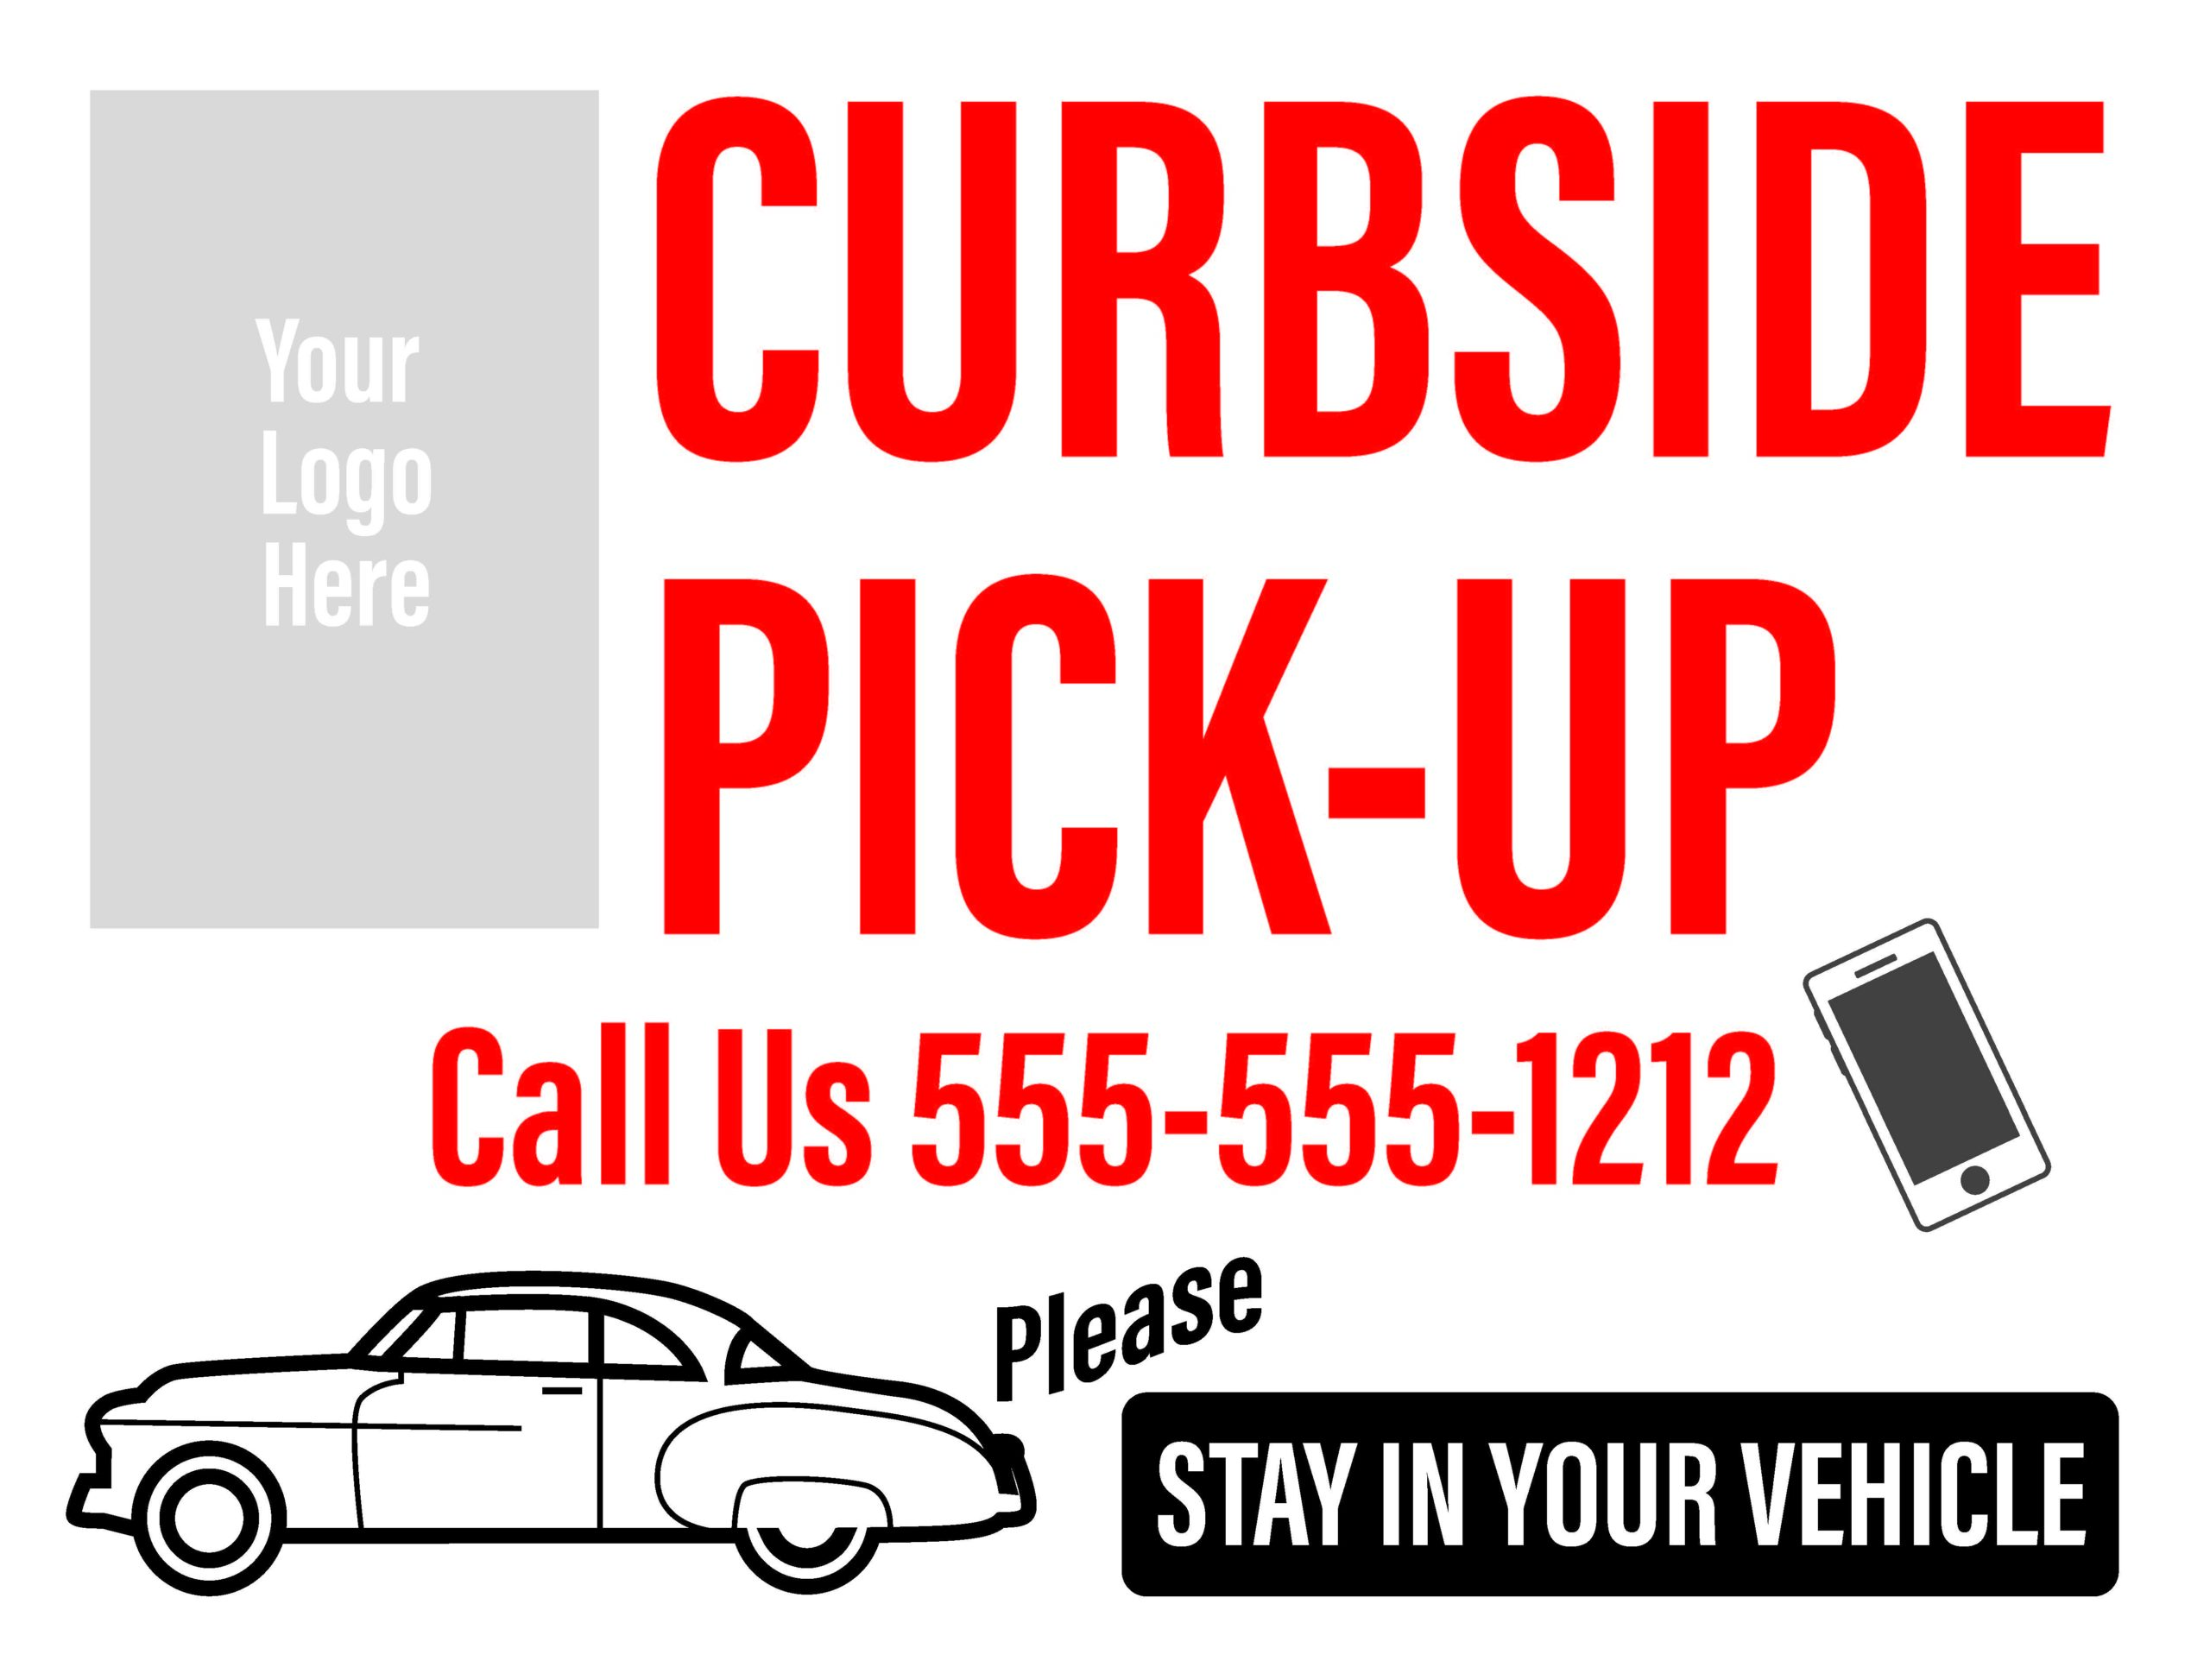 Curbside Pickup Signs 24”x 18” on white corrugated plastic with metal stand(white, stay in your vehicle #2) — 2 pack